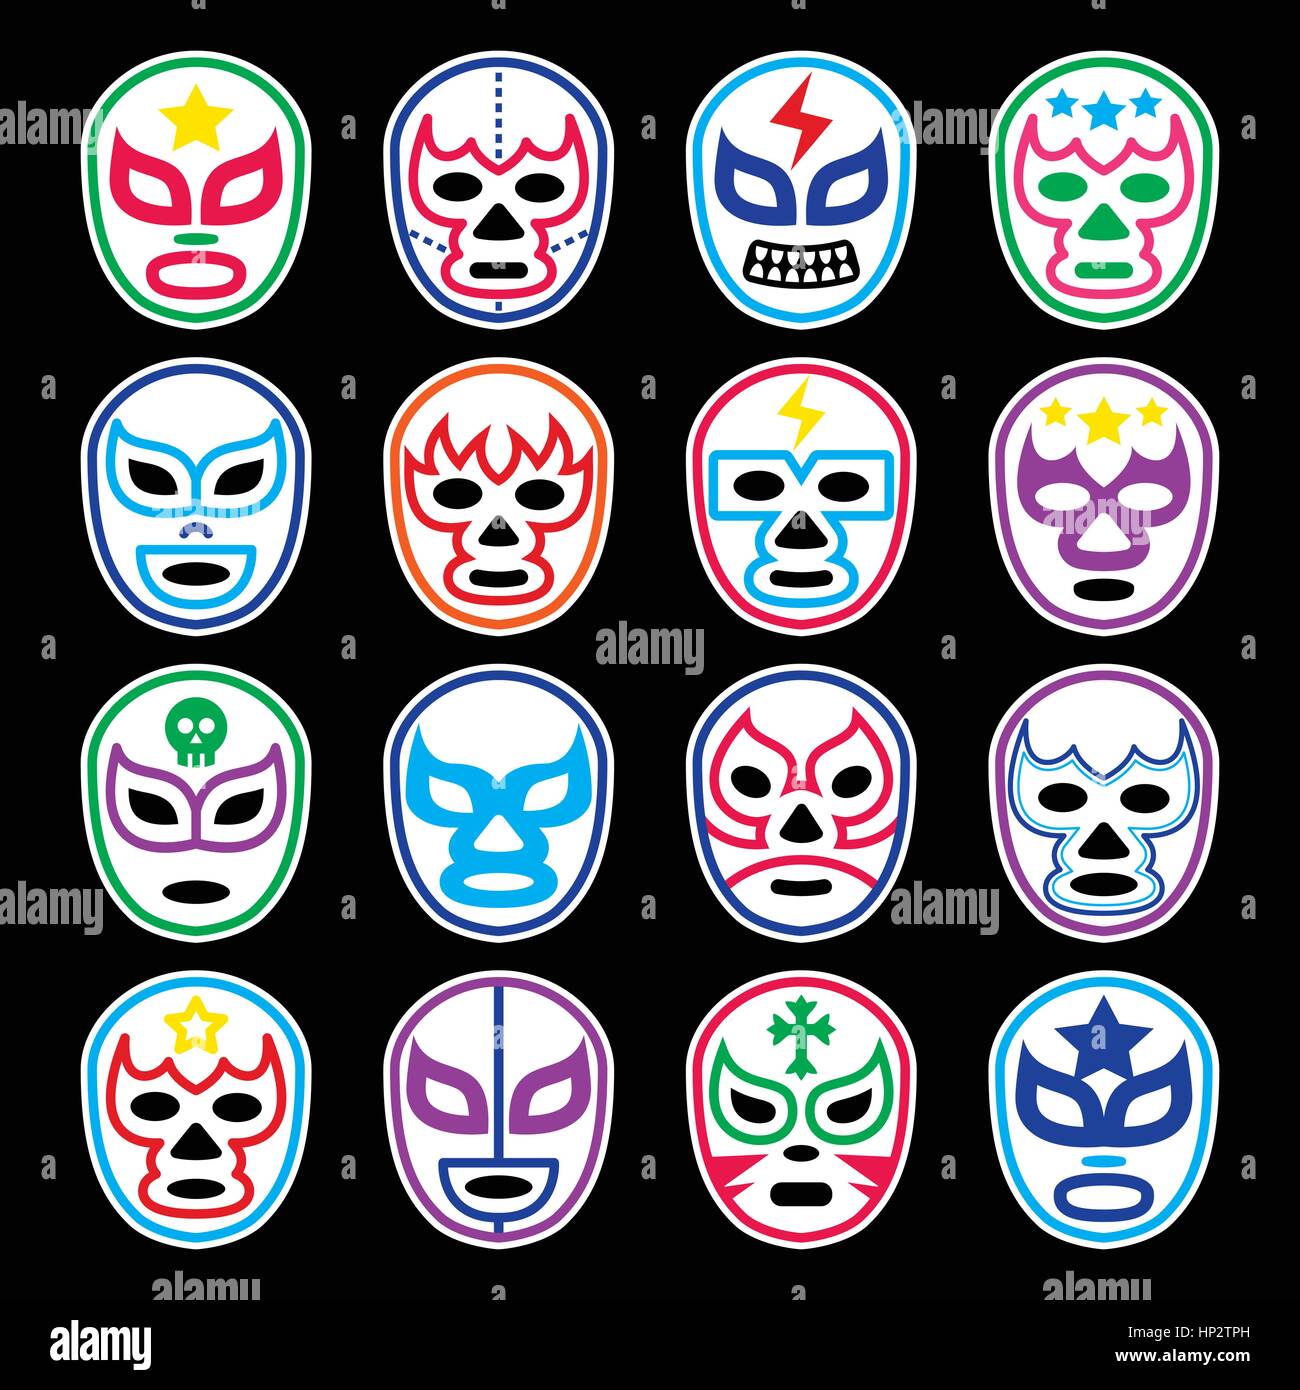 Lucha Libre Mexican wrestling masks icons on black. Vector icons set of masks worn during wrestling fights in Mexico isolated on black Stock Vector